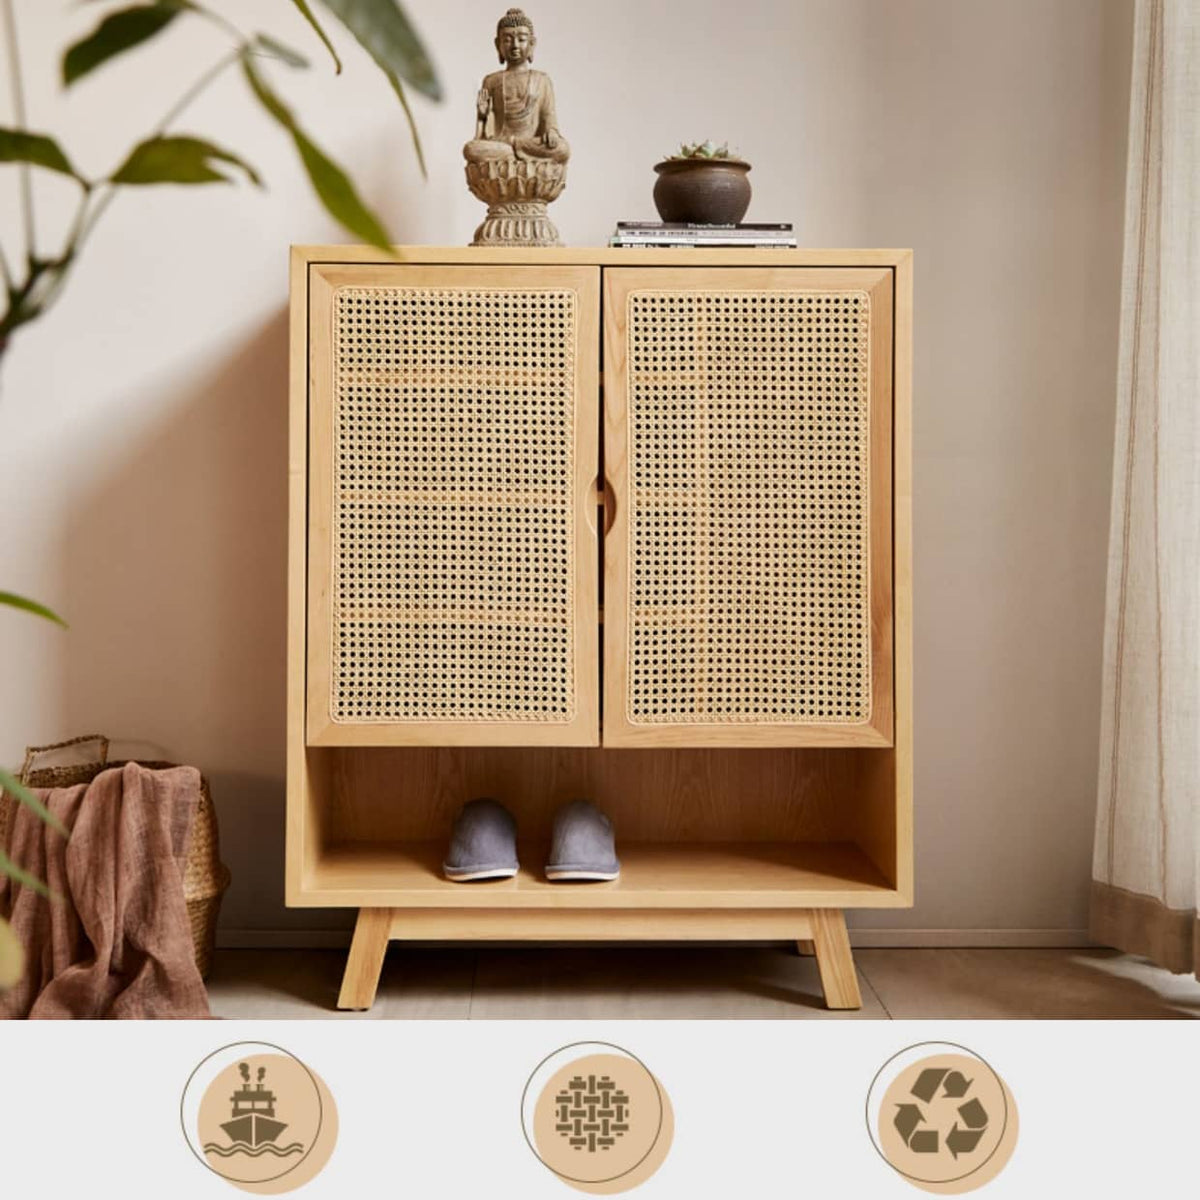 Natural Ash Wood Cabinet with Rattan Accents - Stylish and Durable Storage Solution htzm-1508